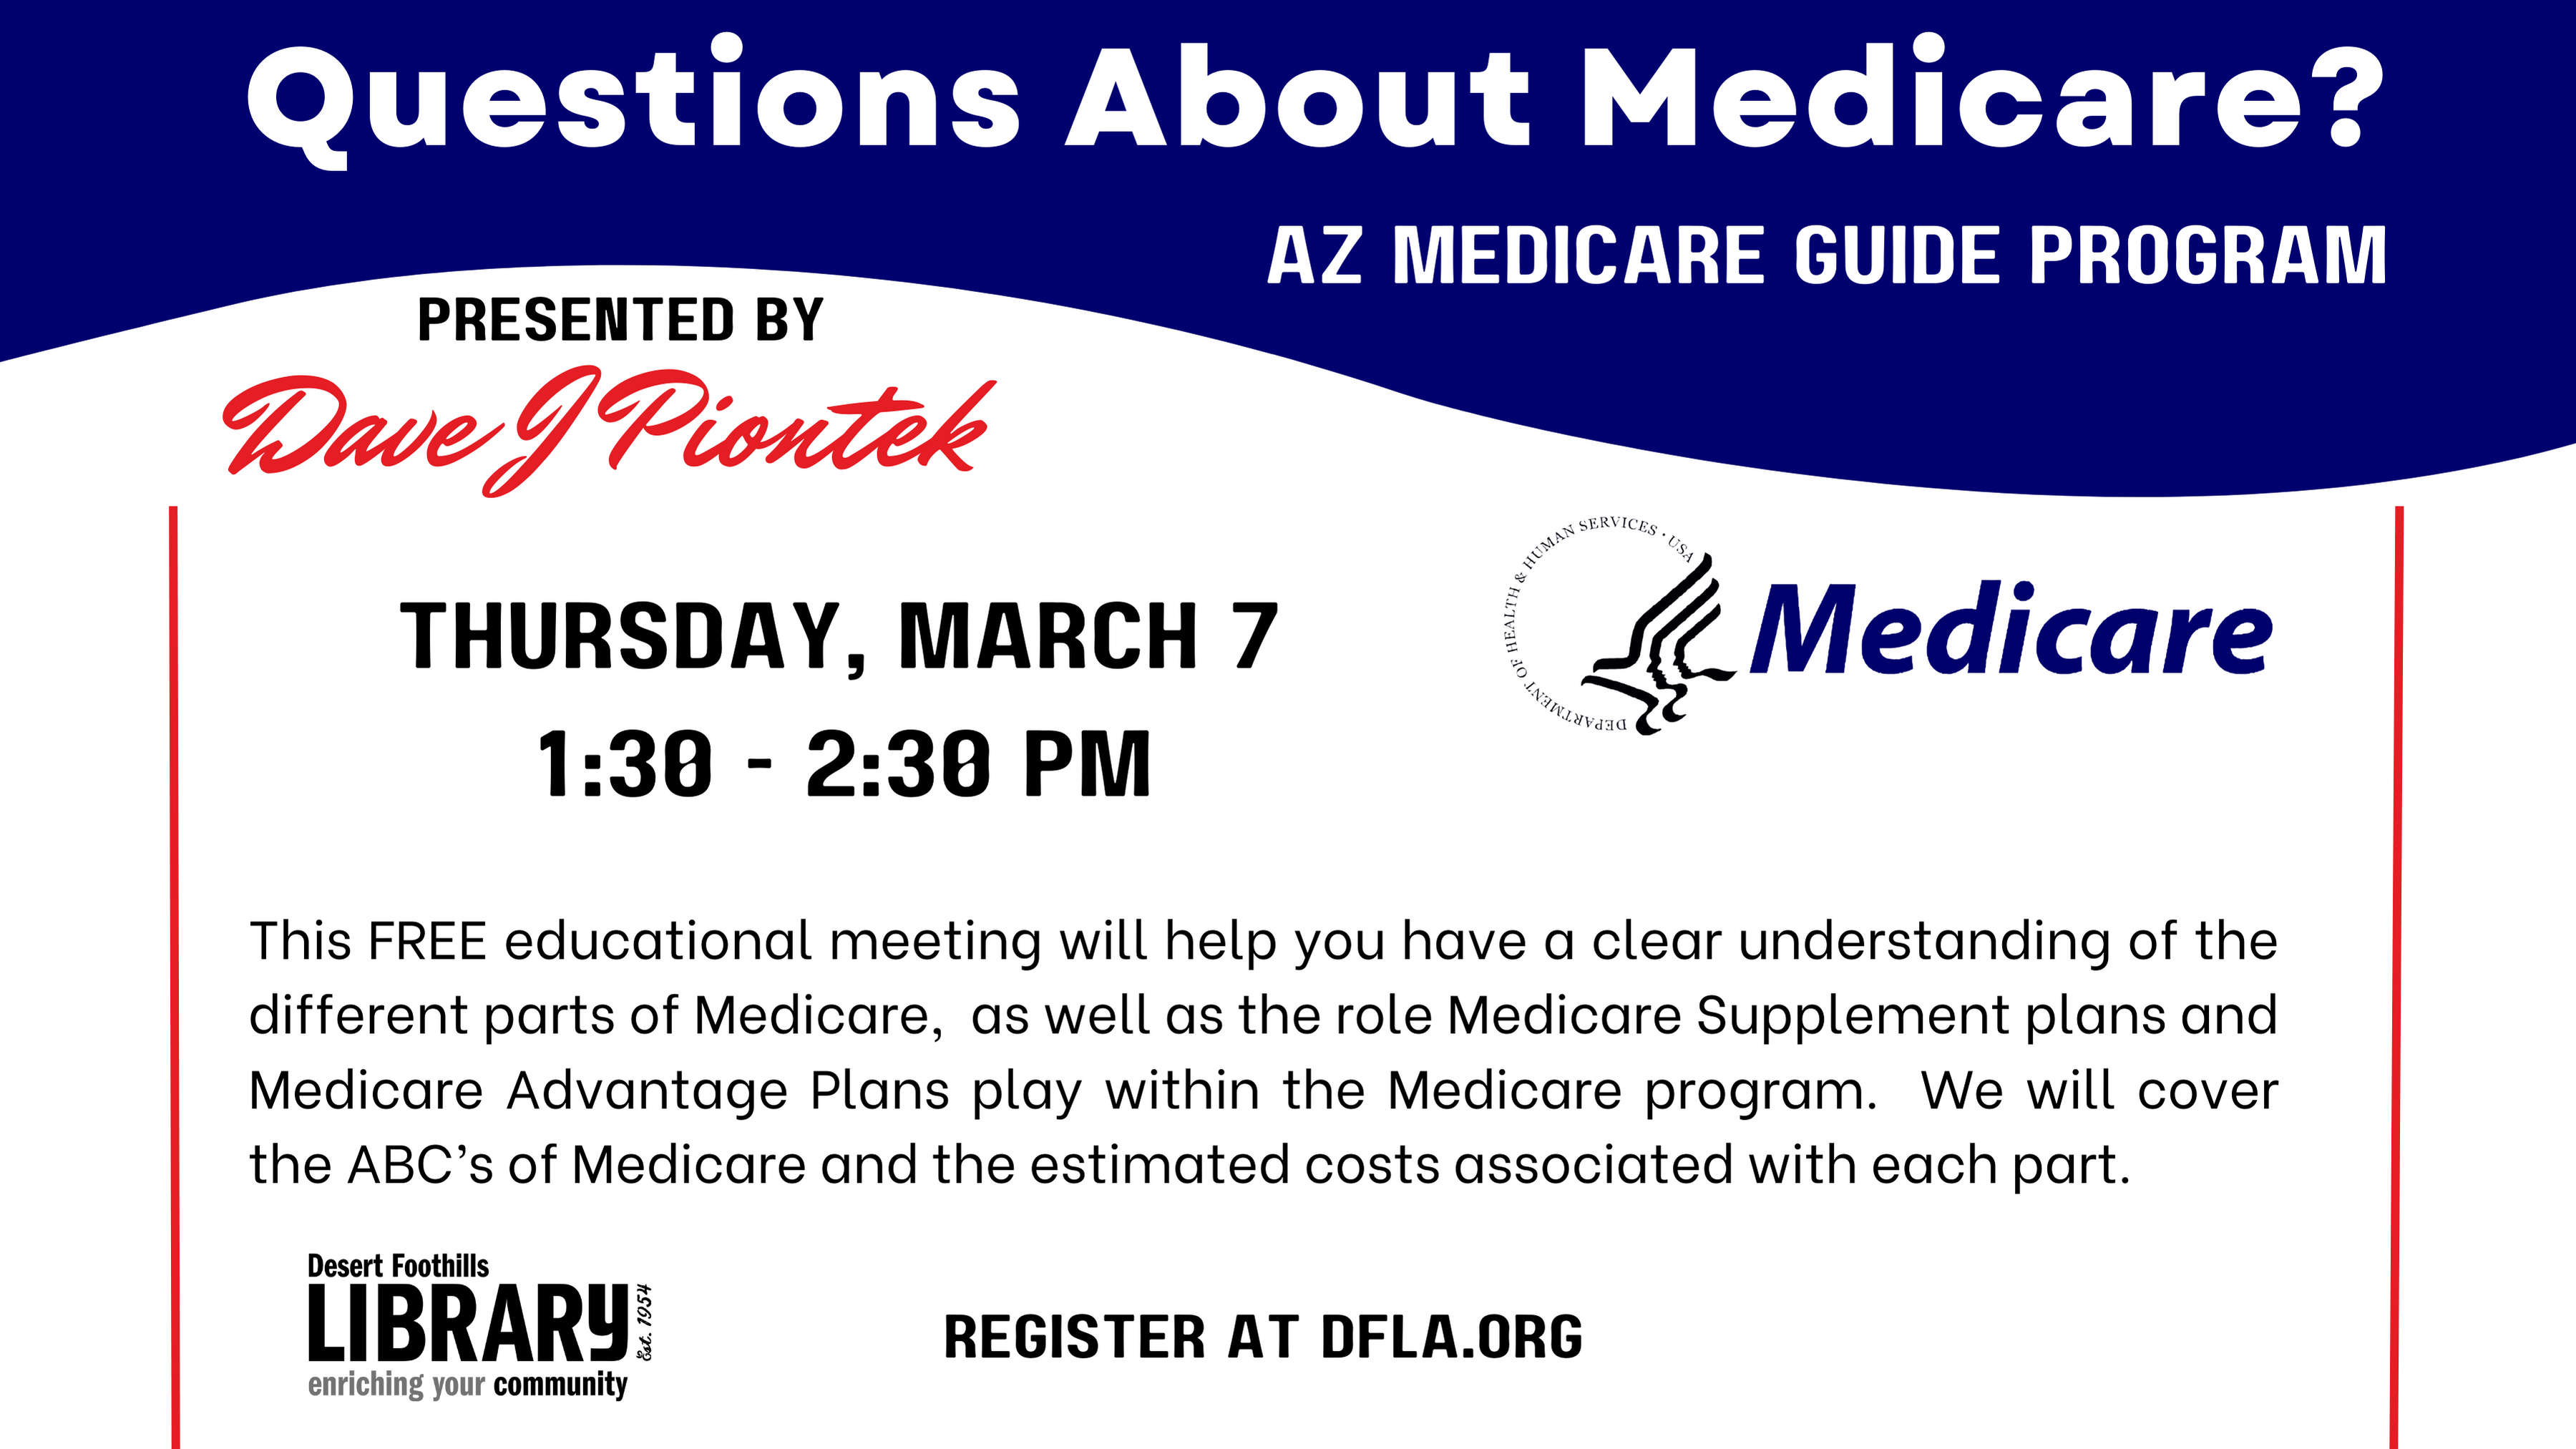 questions about medicare workshp at the desert foothills library